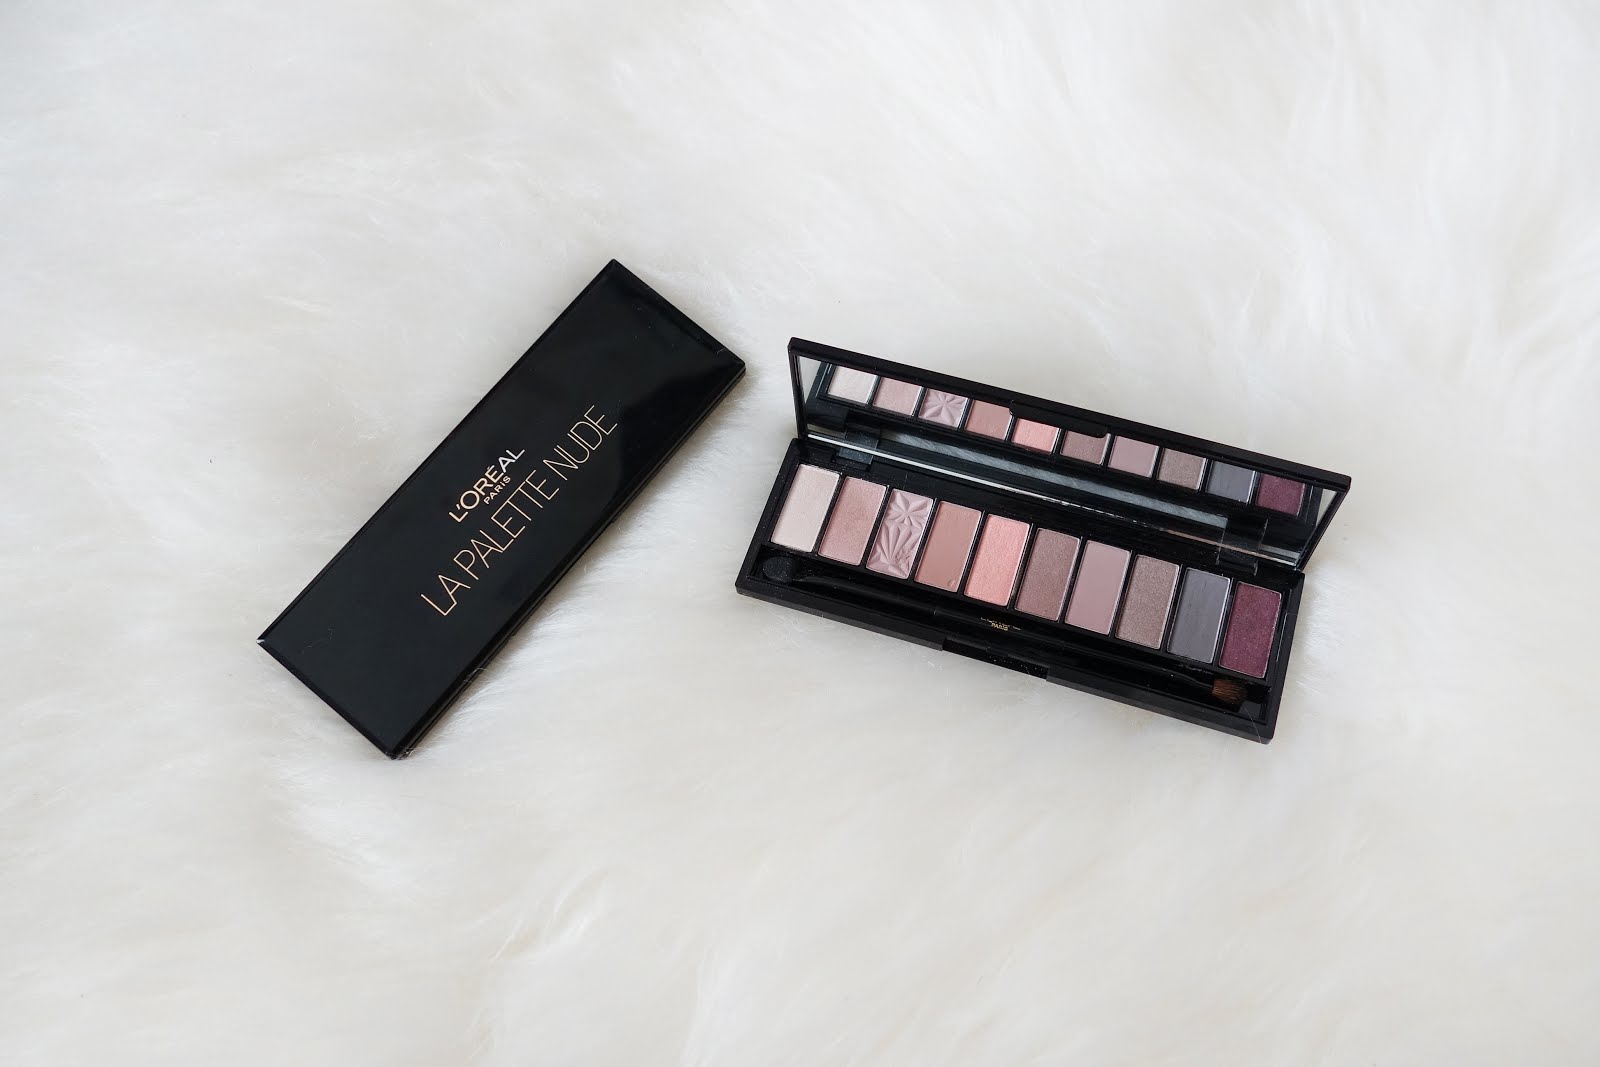 LOreal La Palette Nude - Beige & Rose Review and Swatches 